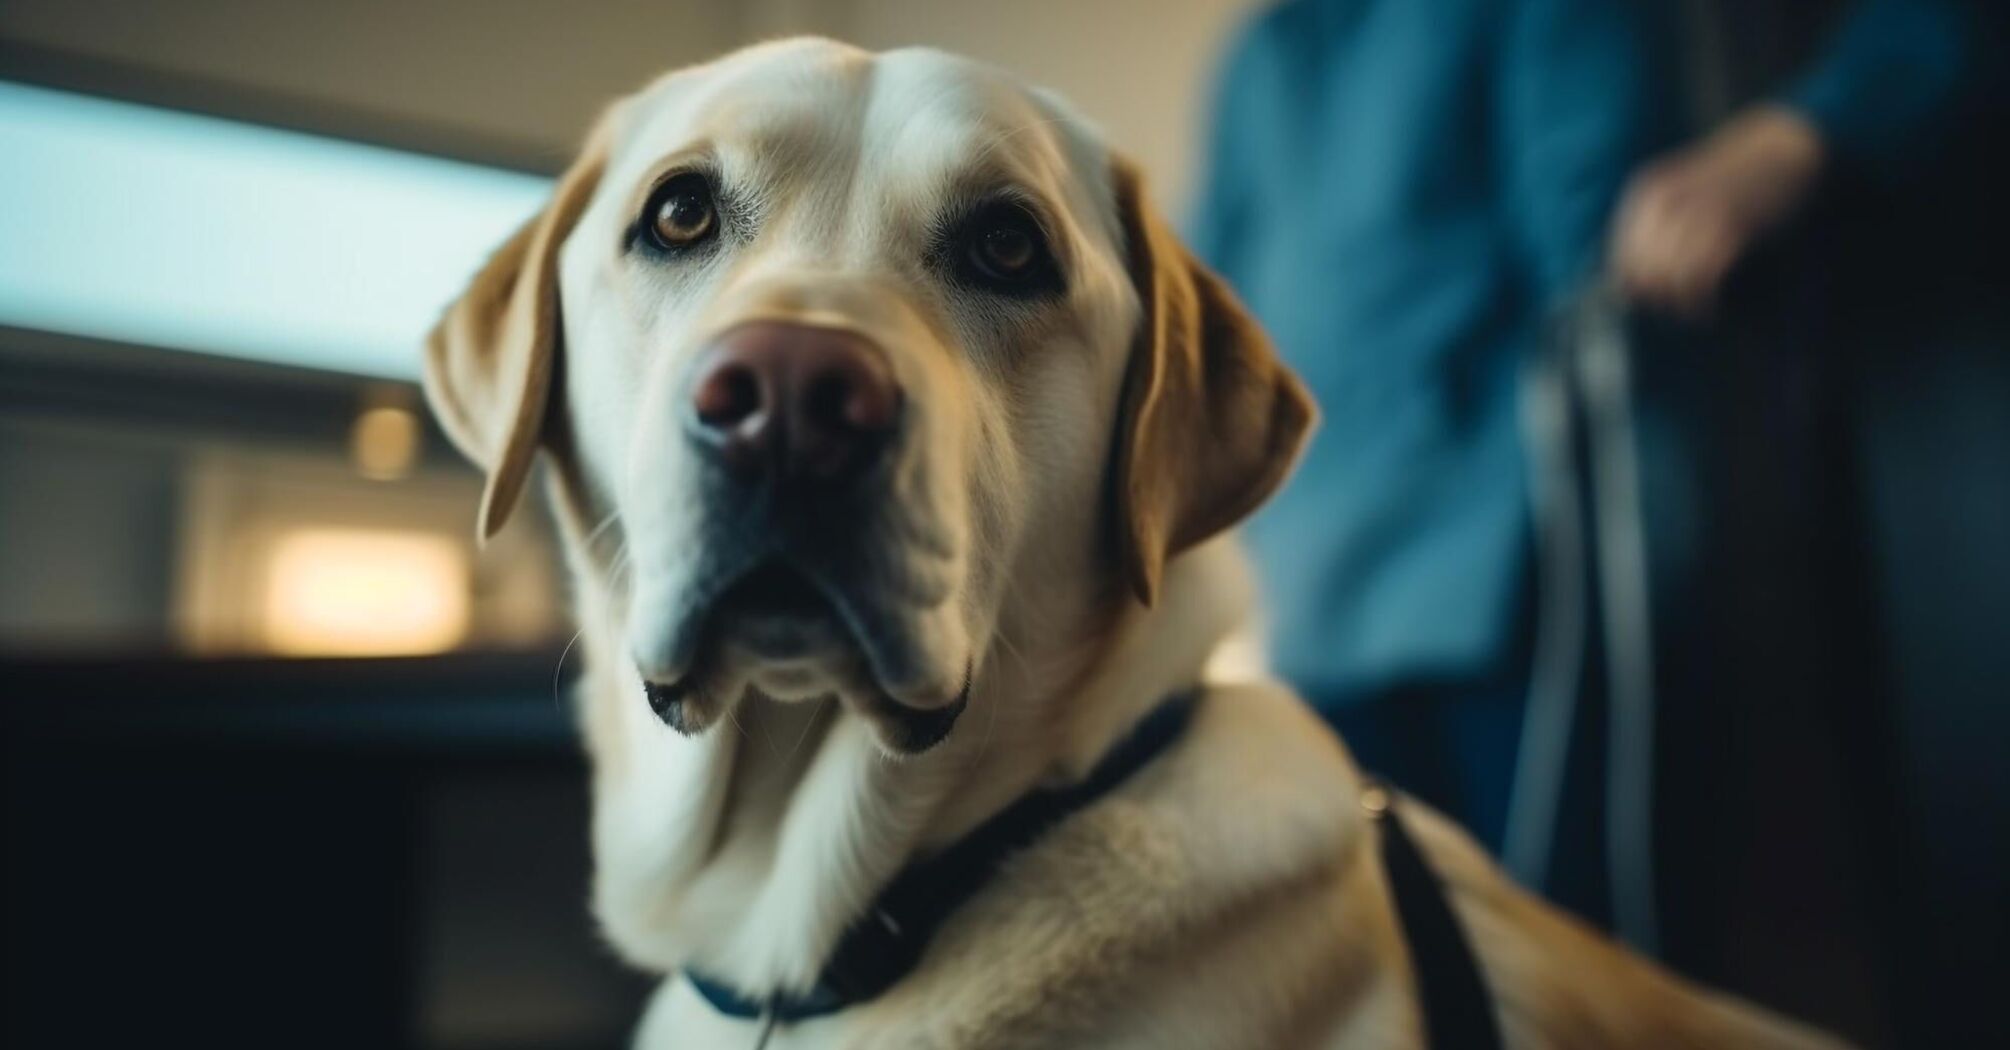 The airport in Istanbul offers its clients the services of therapy dogs